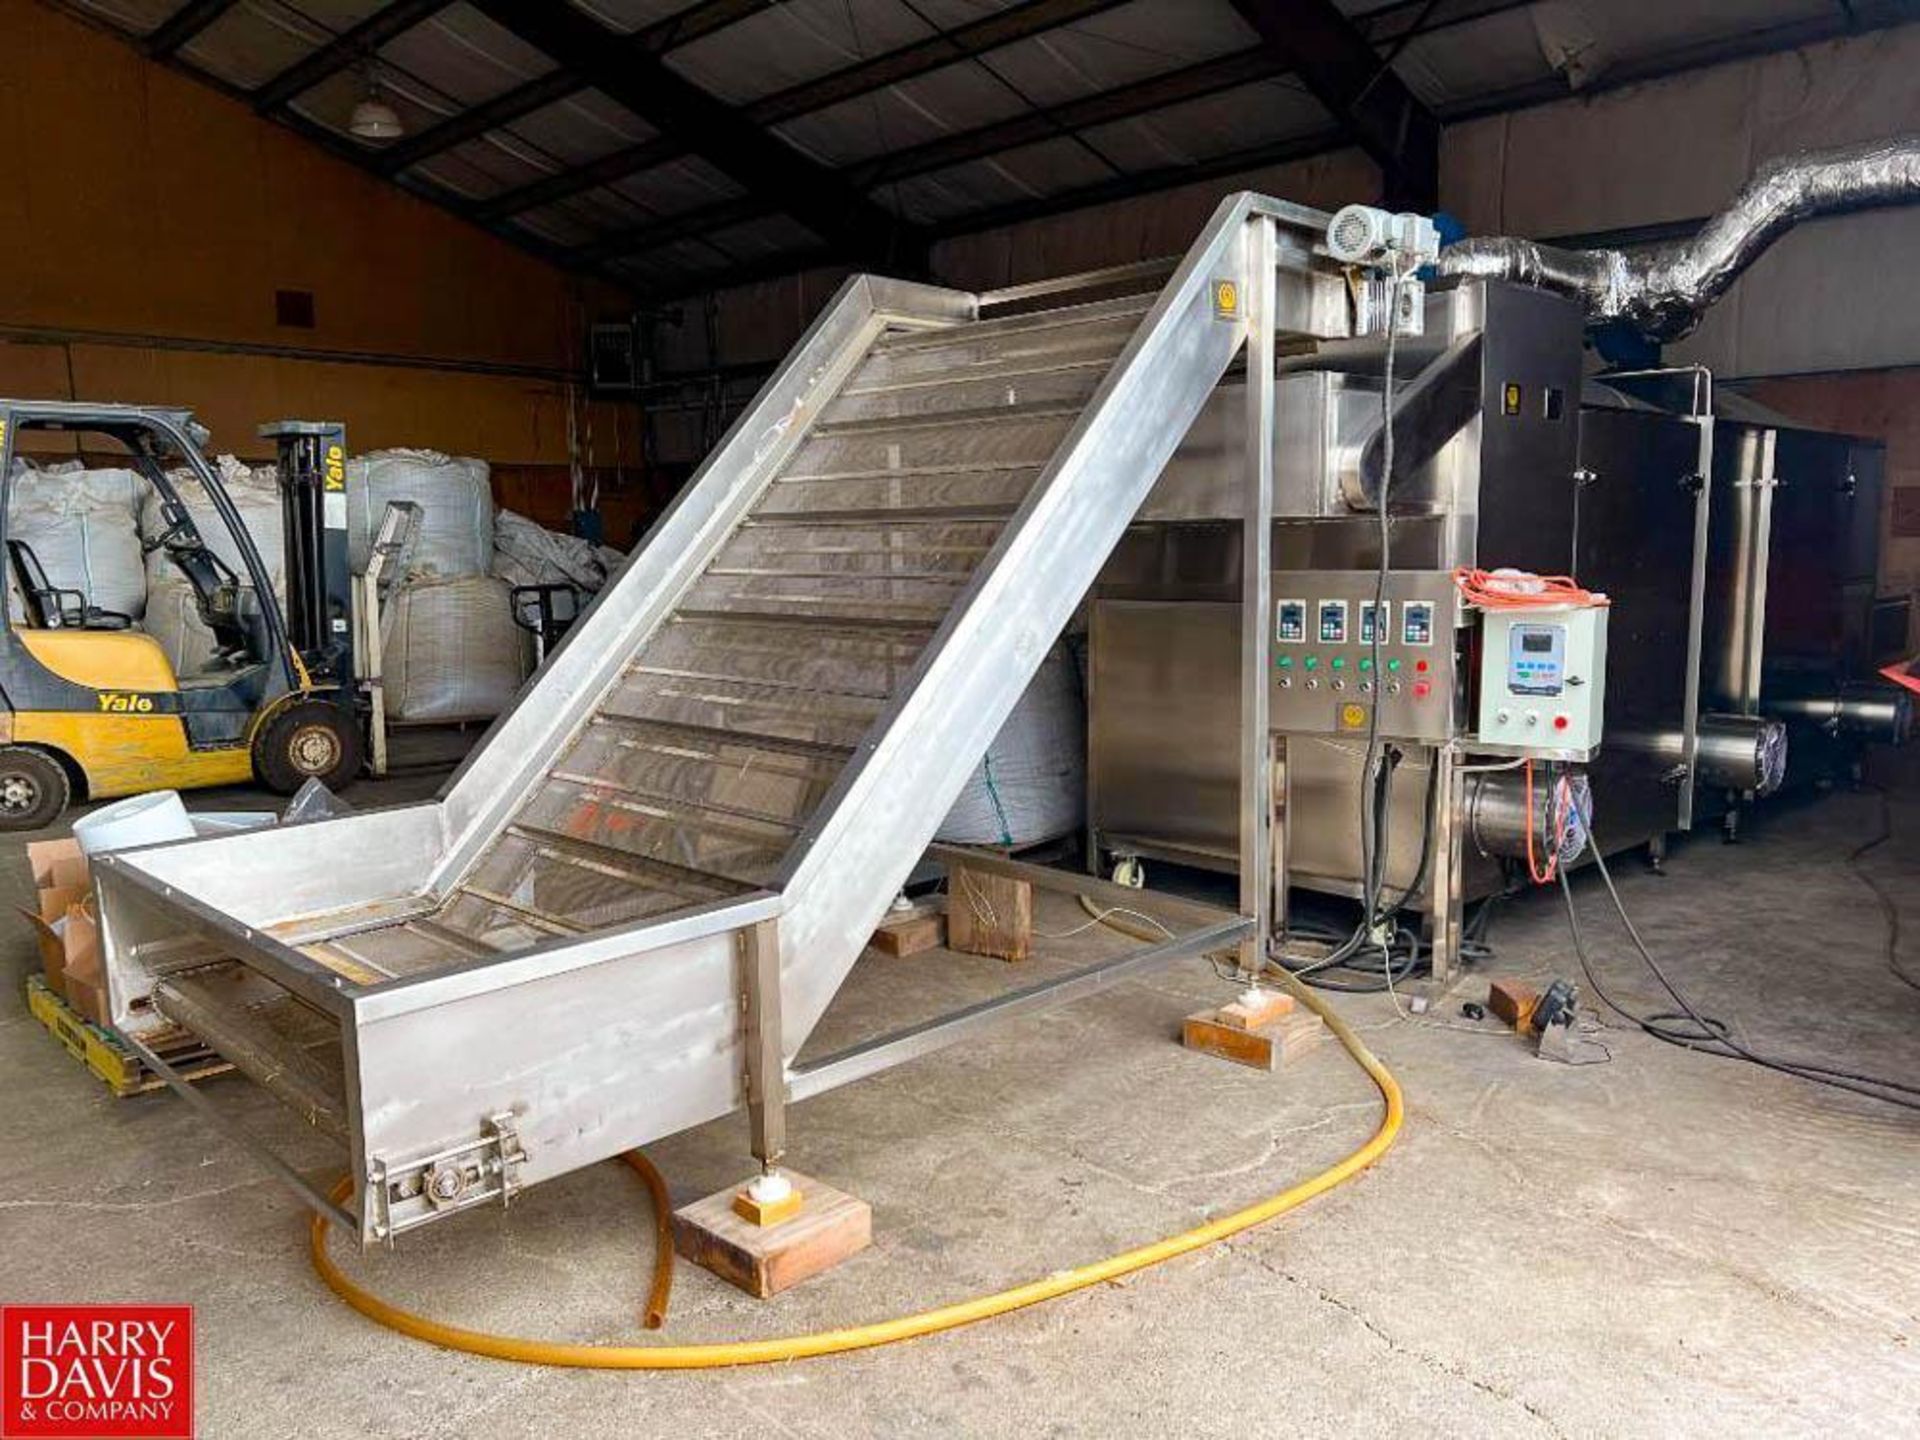 NEW 2019 Hemp Drying Machine Model DF-1: SN 201908001, with Elevator, Dimensions = 20' Length x 5' W - Image 12 of 13